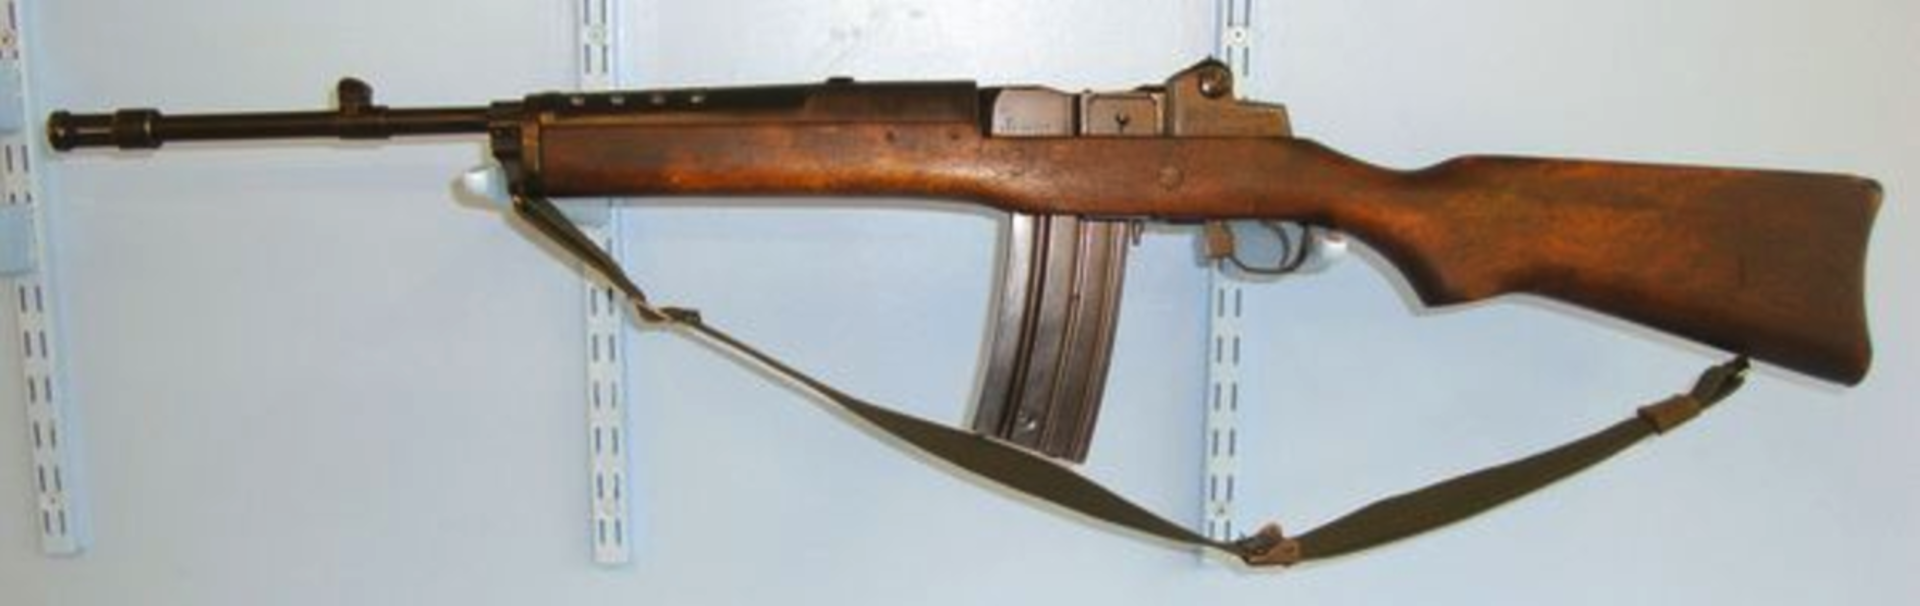 1973 To Present, USA Sturm Ruger Mini-14 .223 Calibre Semi Automatic Carbine With Sling - Image 3 of 3